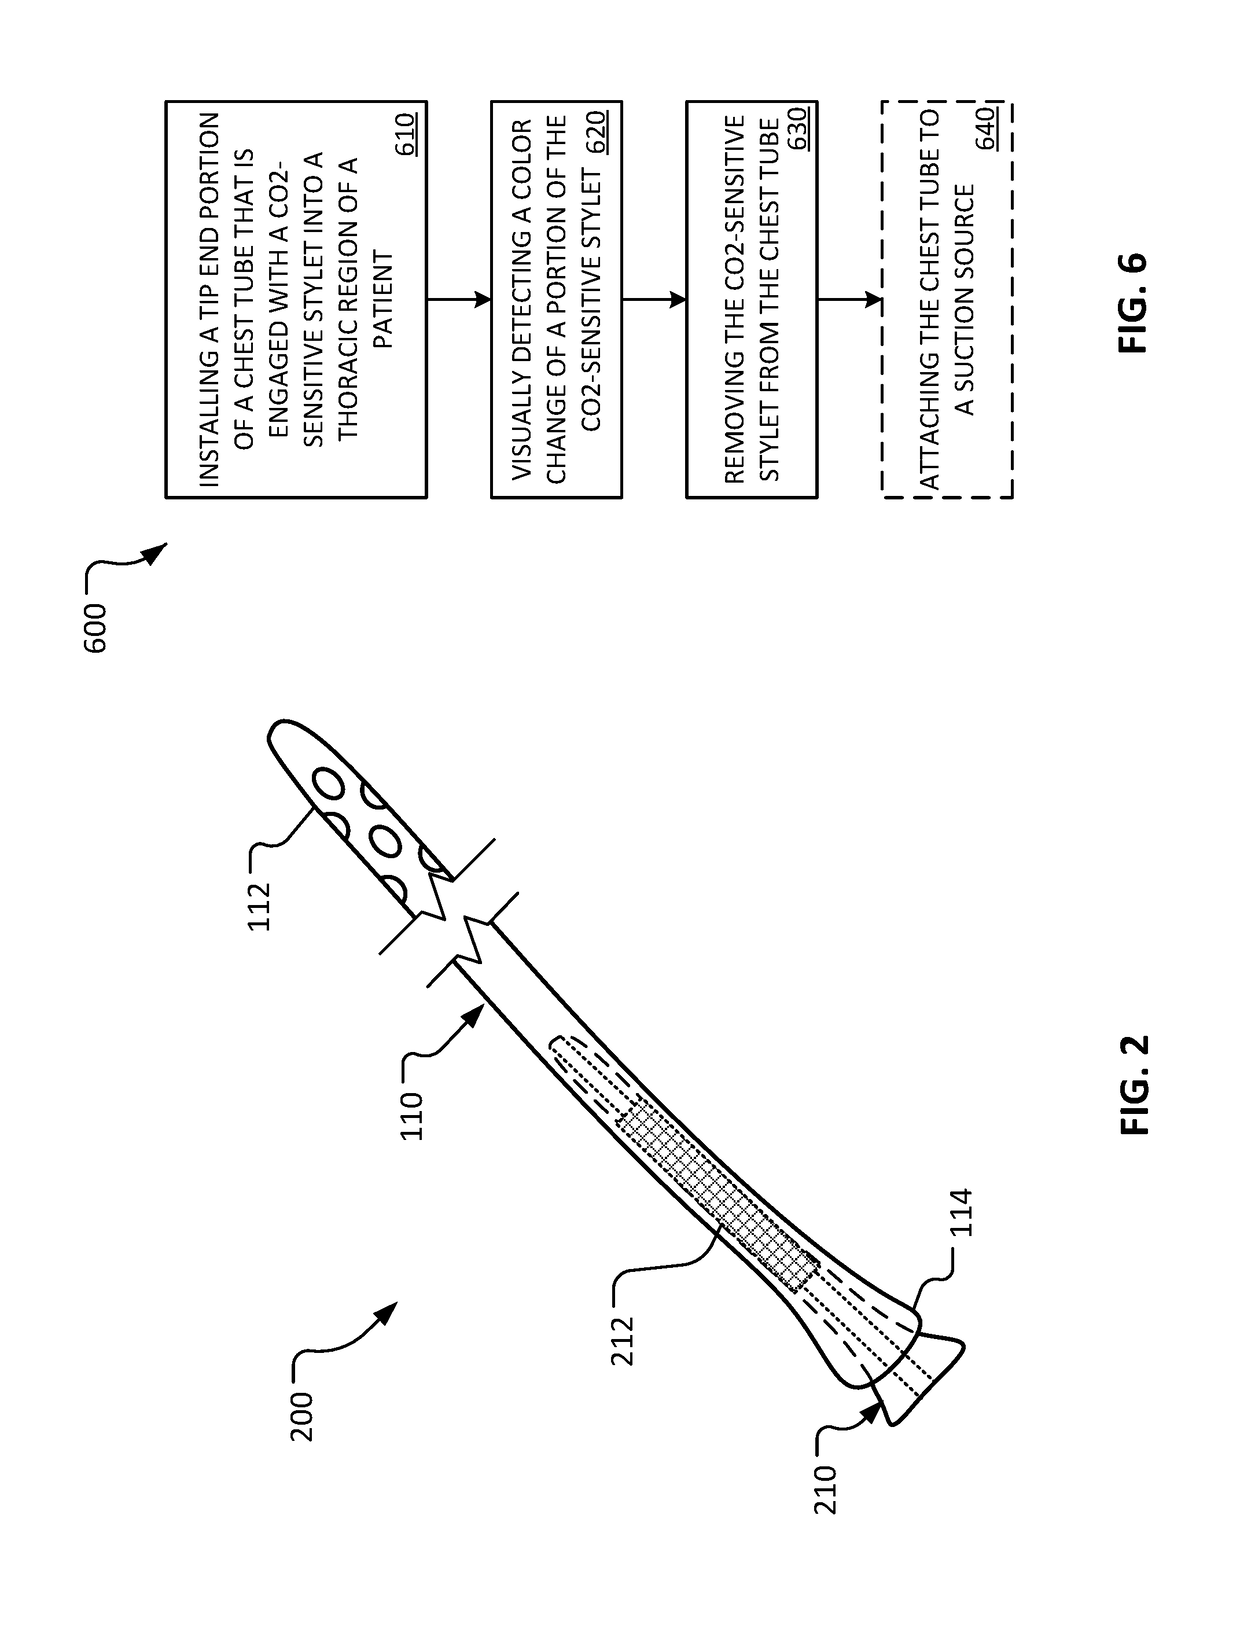 Co2-sensing chest tube and needle thoracostomy devices